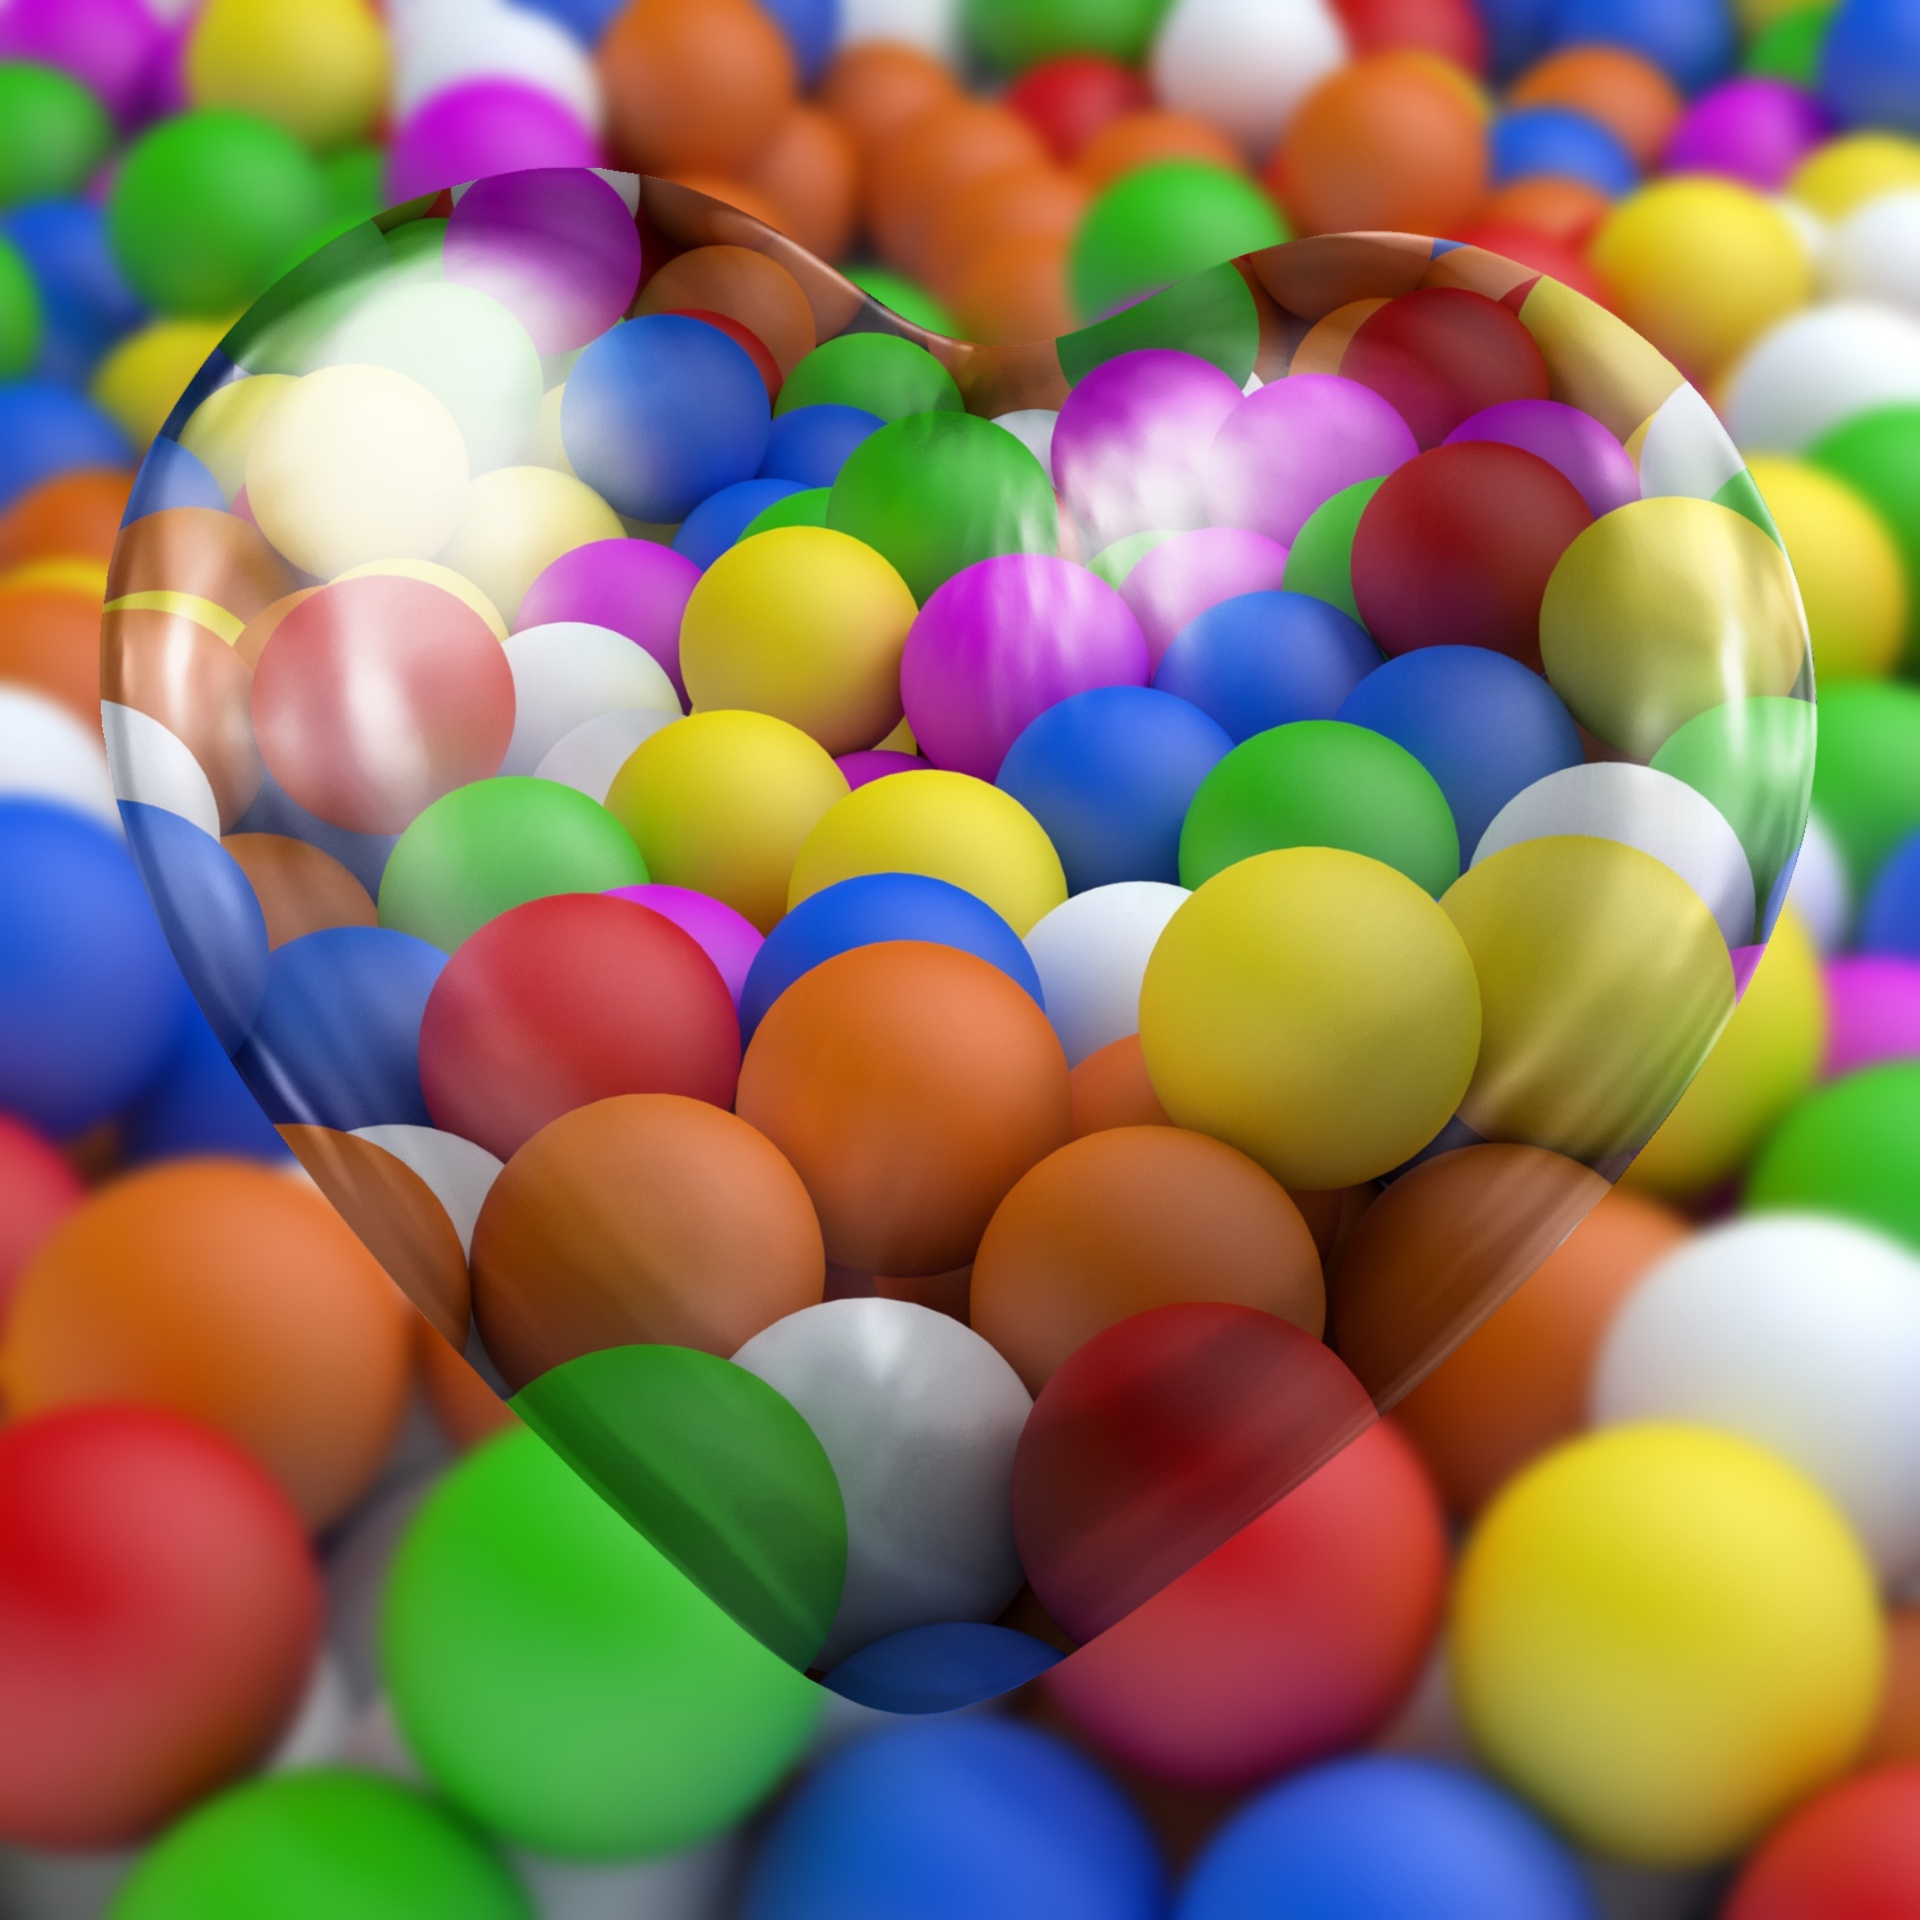 Download free photo of Wallpaper,glass,heart,color,balls - from 